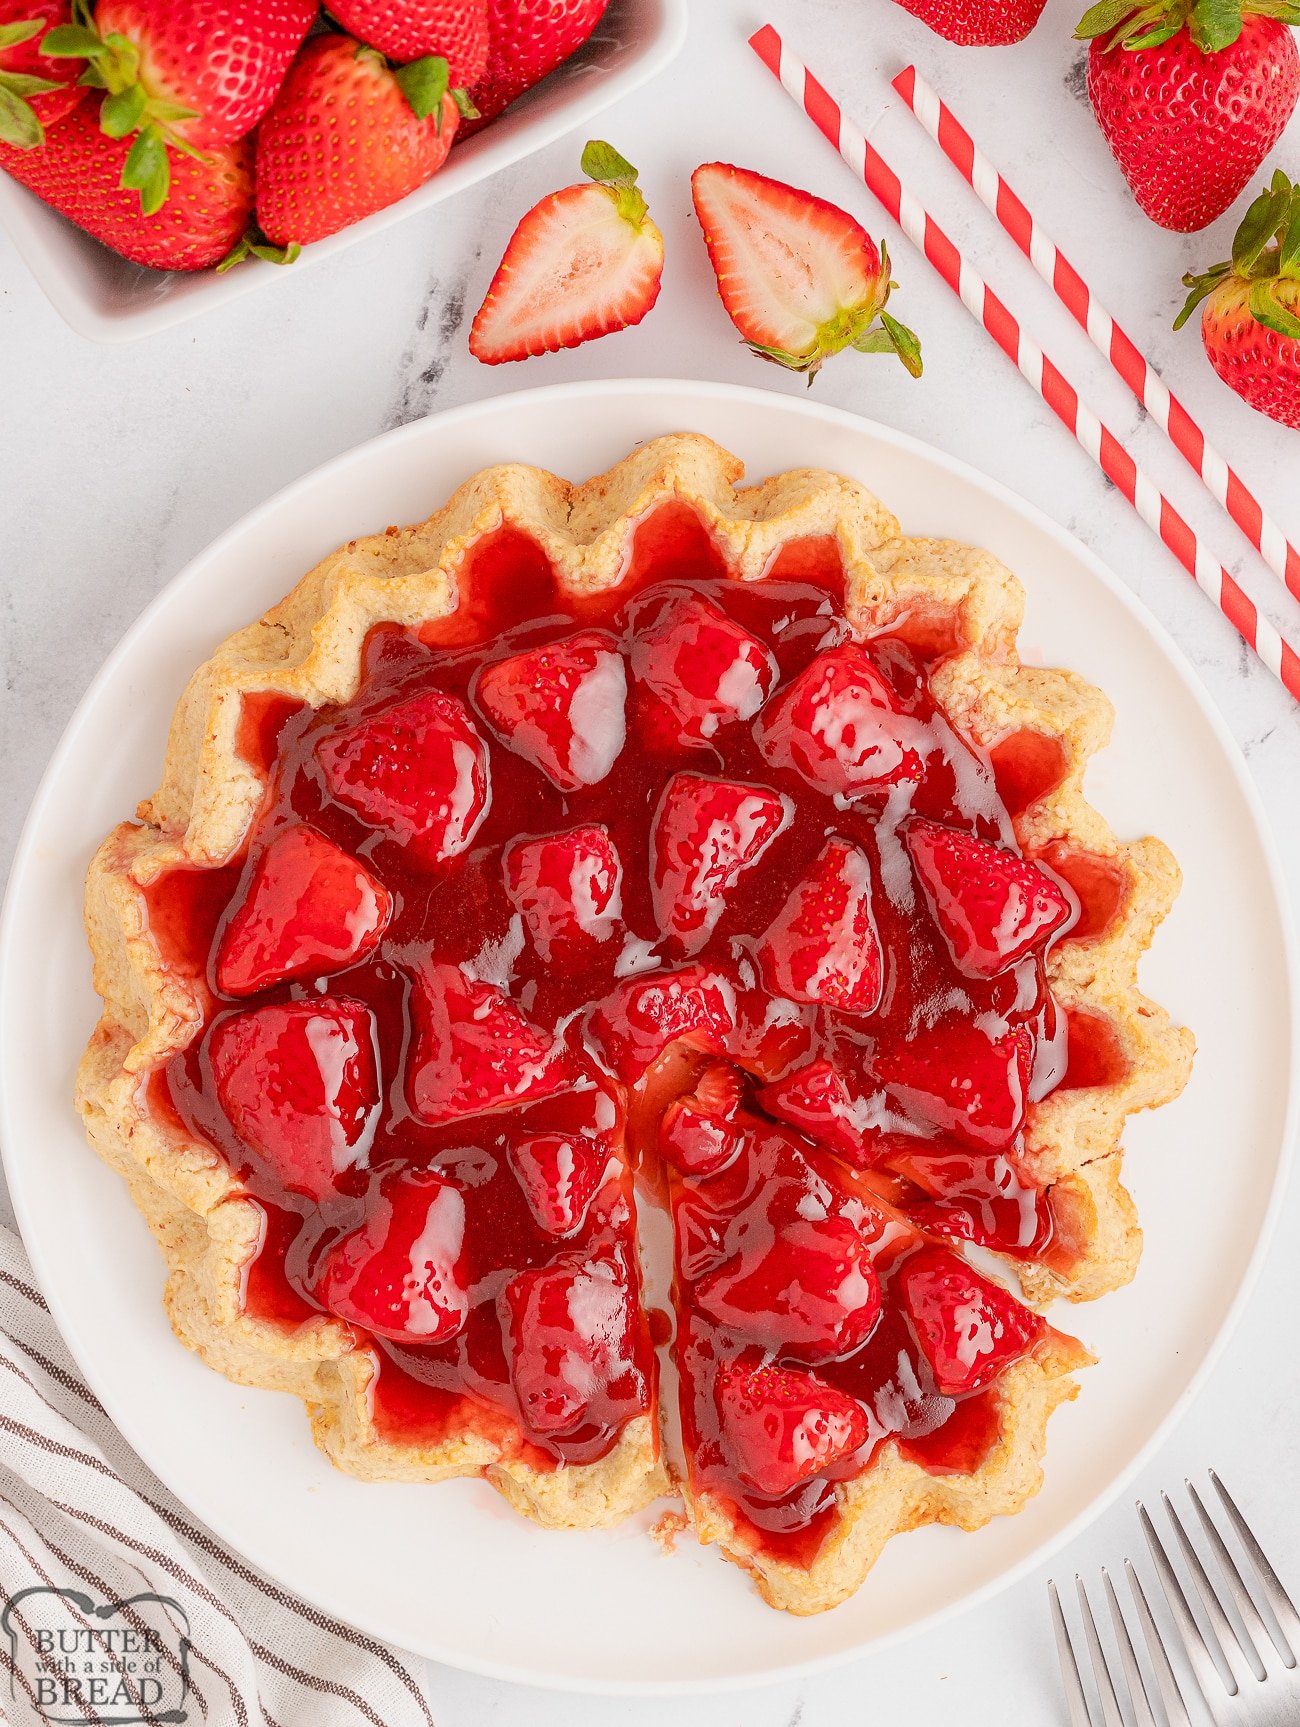 serving up a slice of strawberry tart